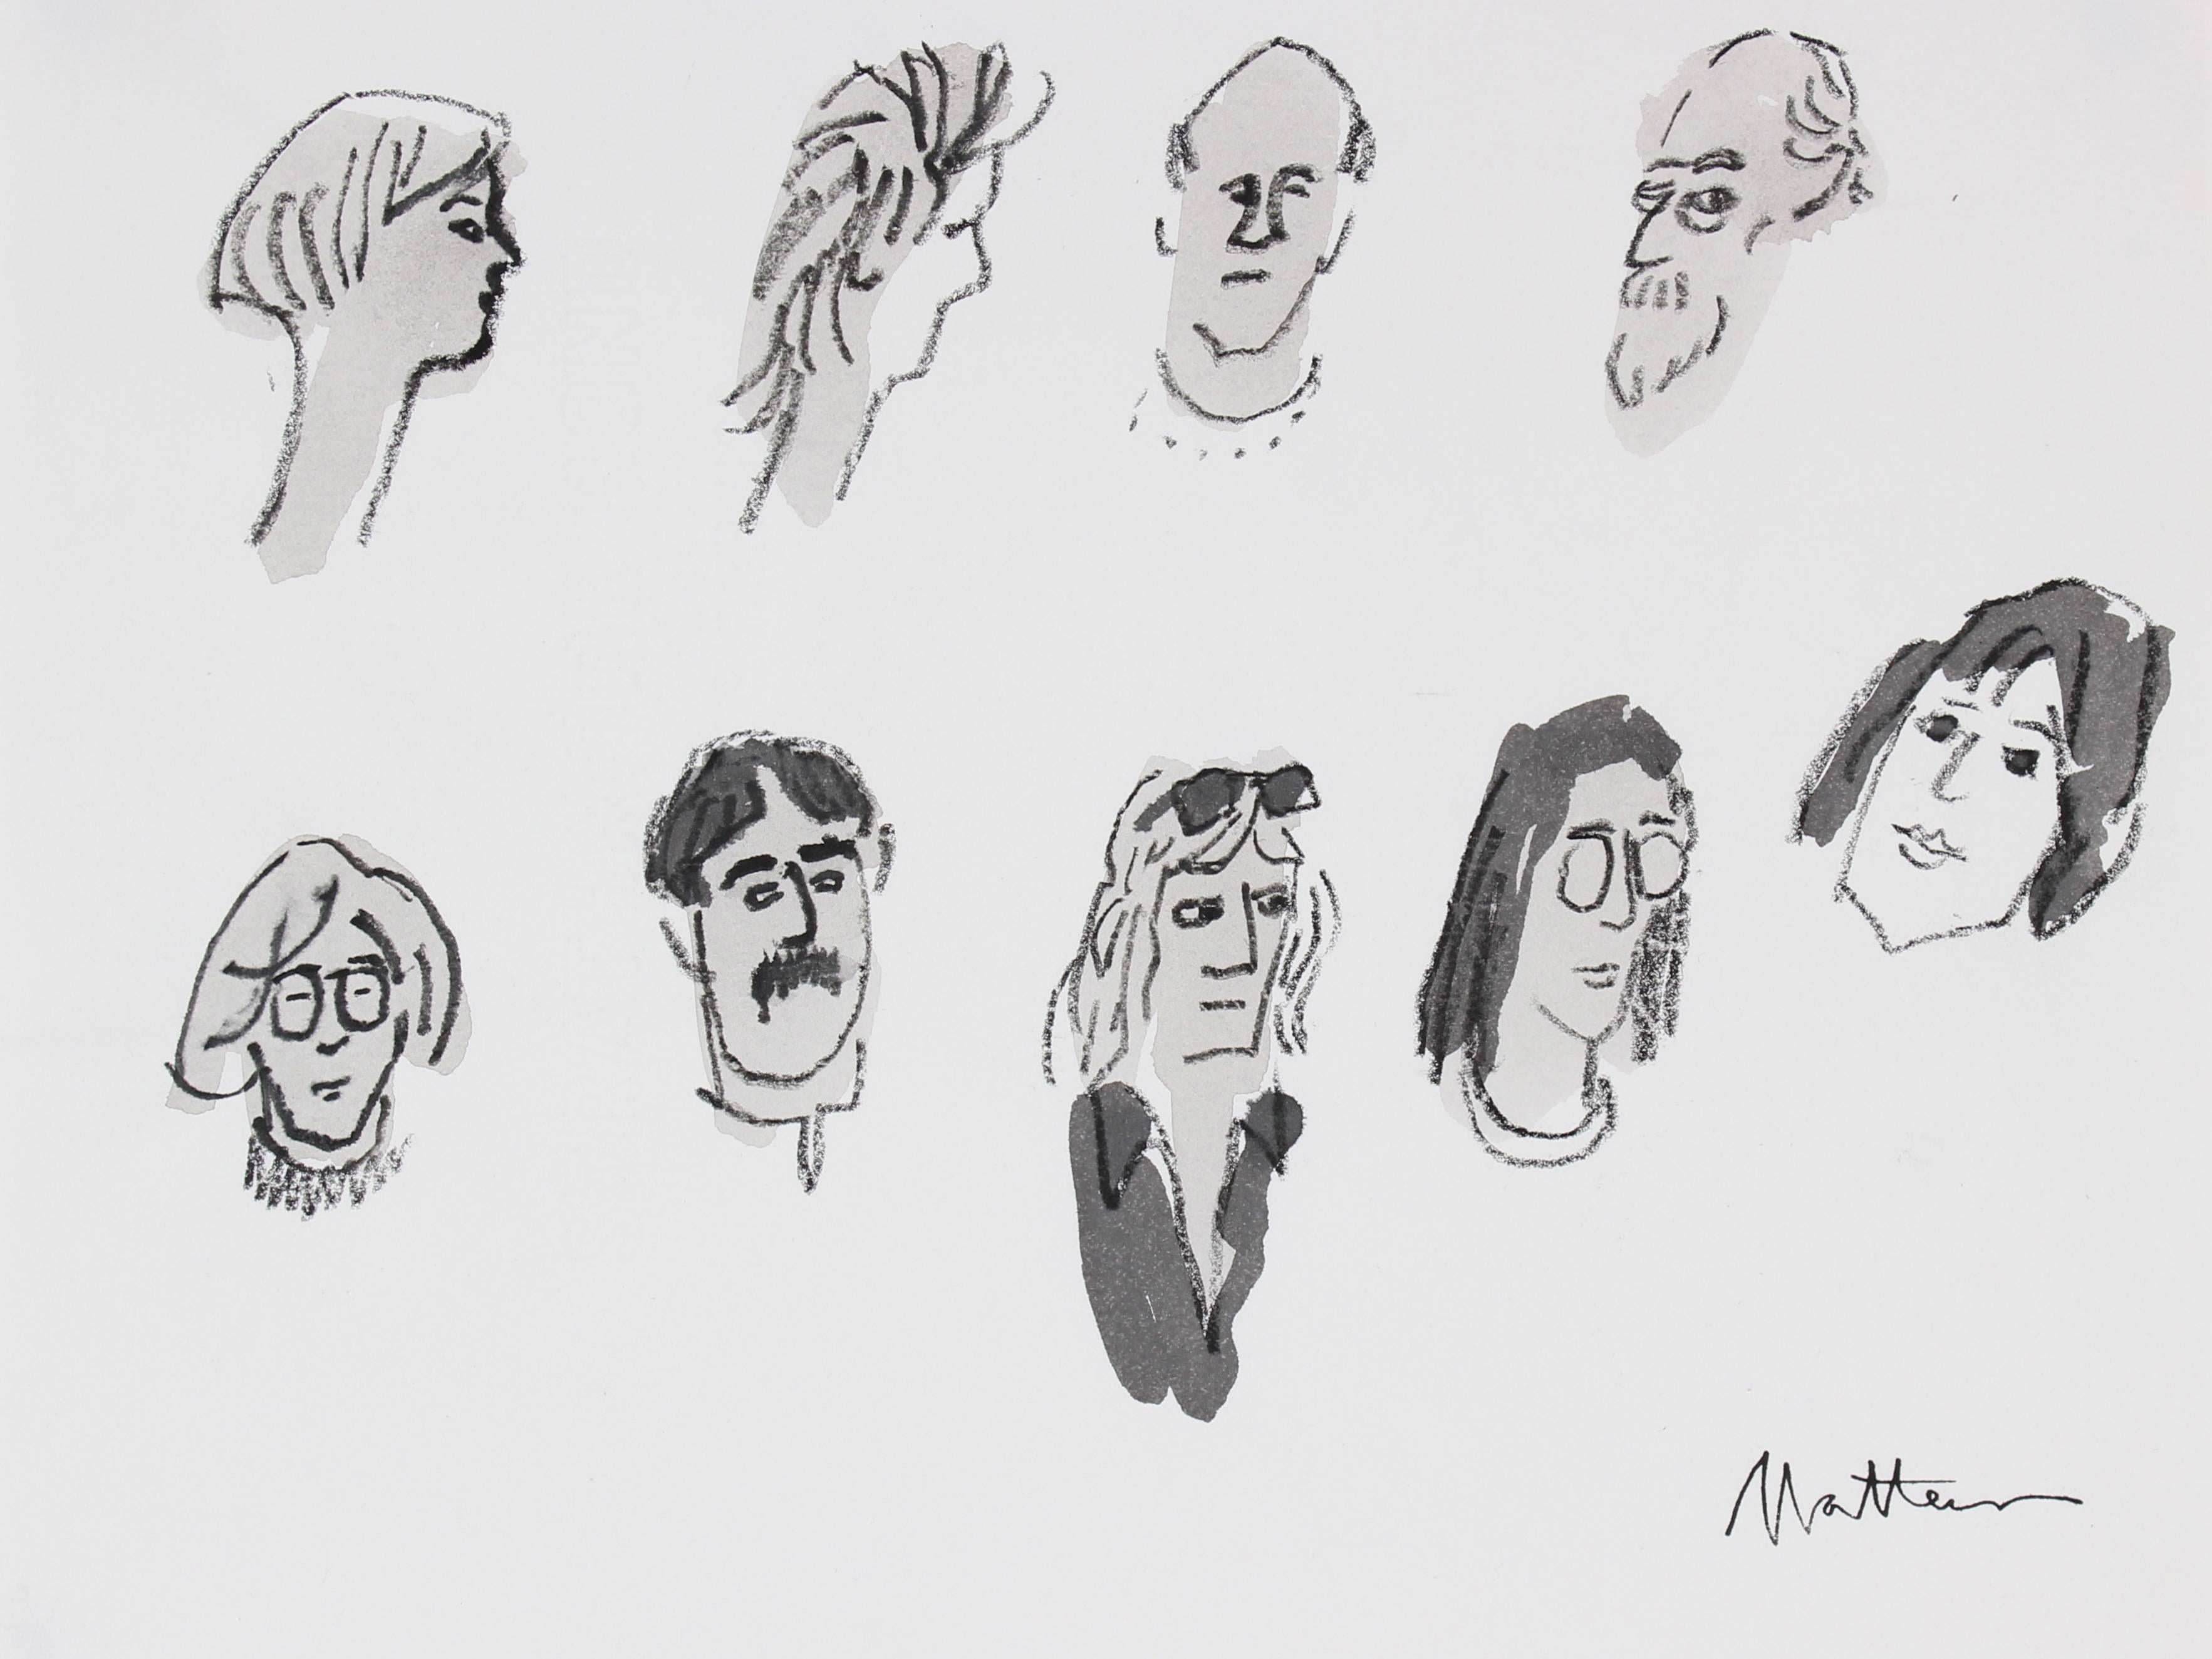 Monochromatic Portrait Studies of Various People in Ink & Charcoal, 20th Century - Art by Rip Matteson